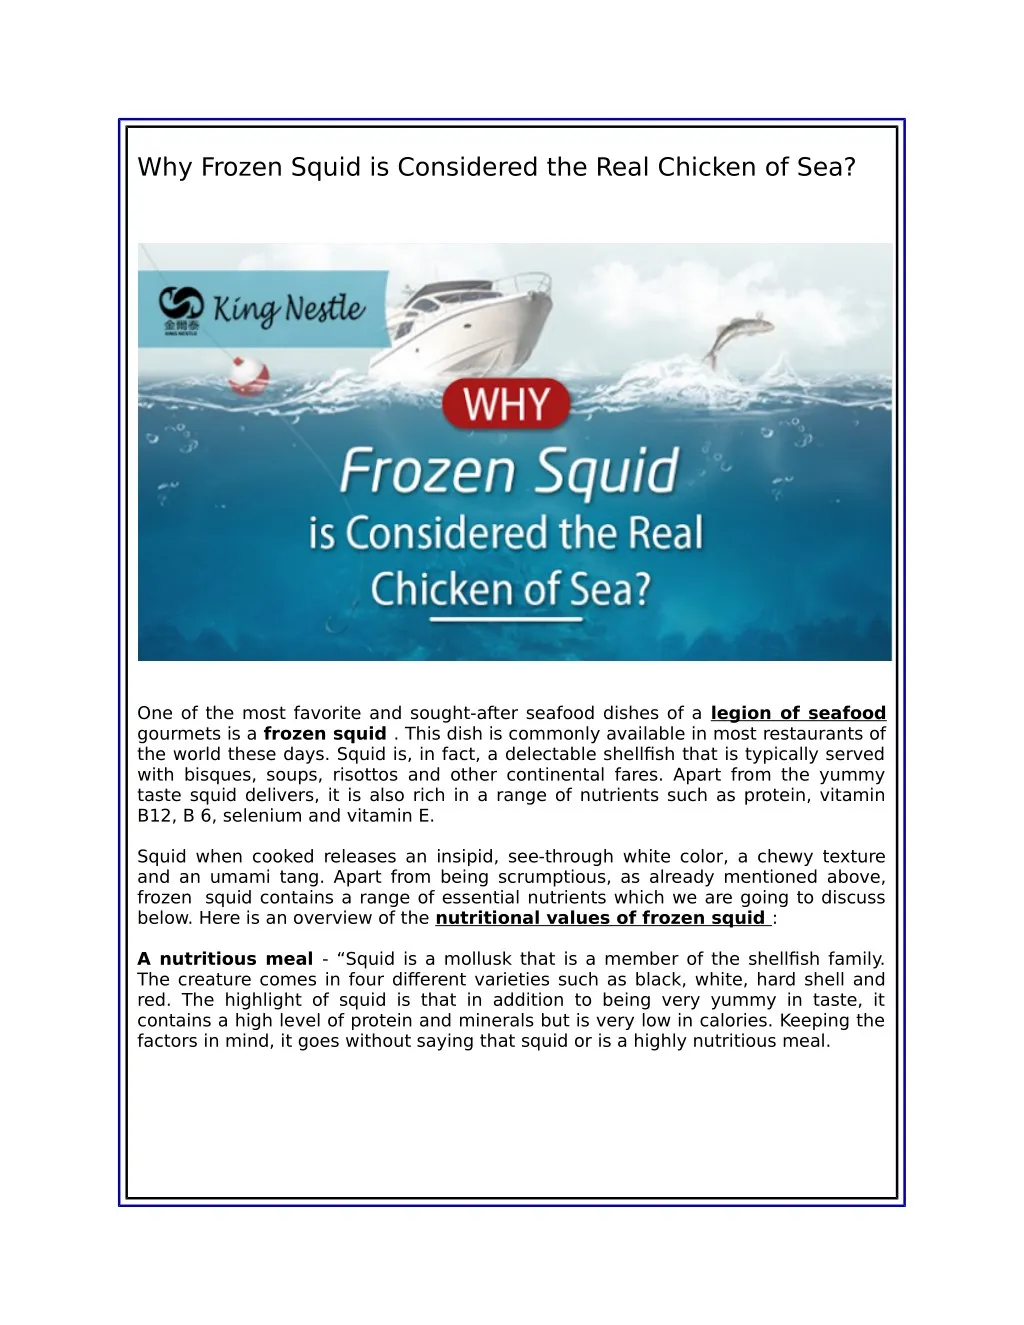 why frozen squid is considered the real chicken